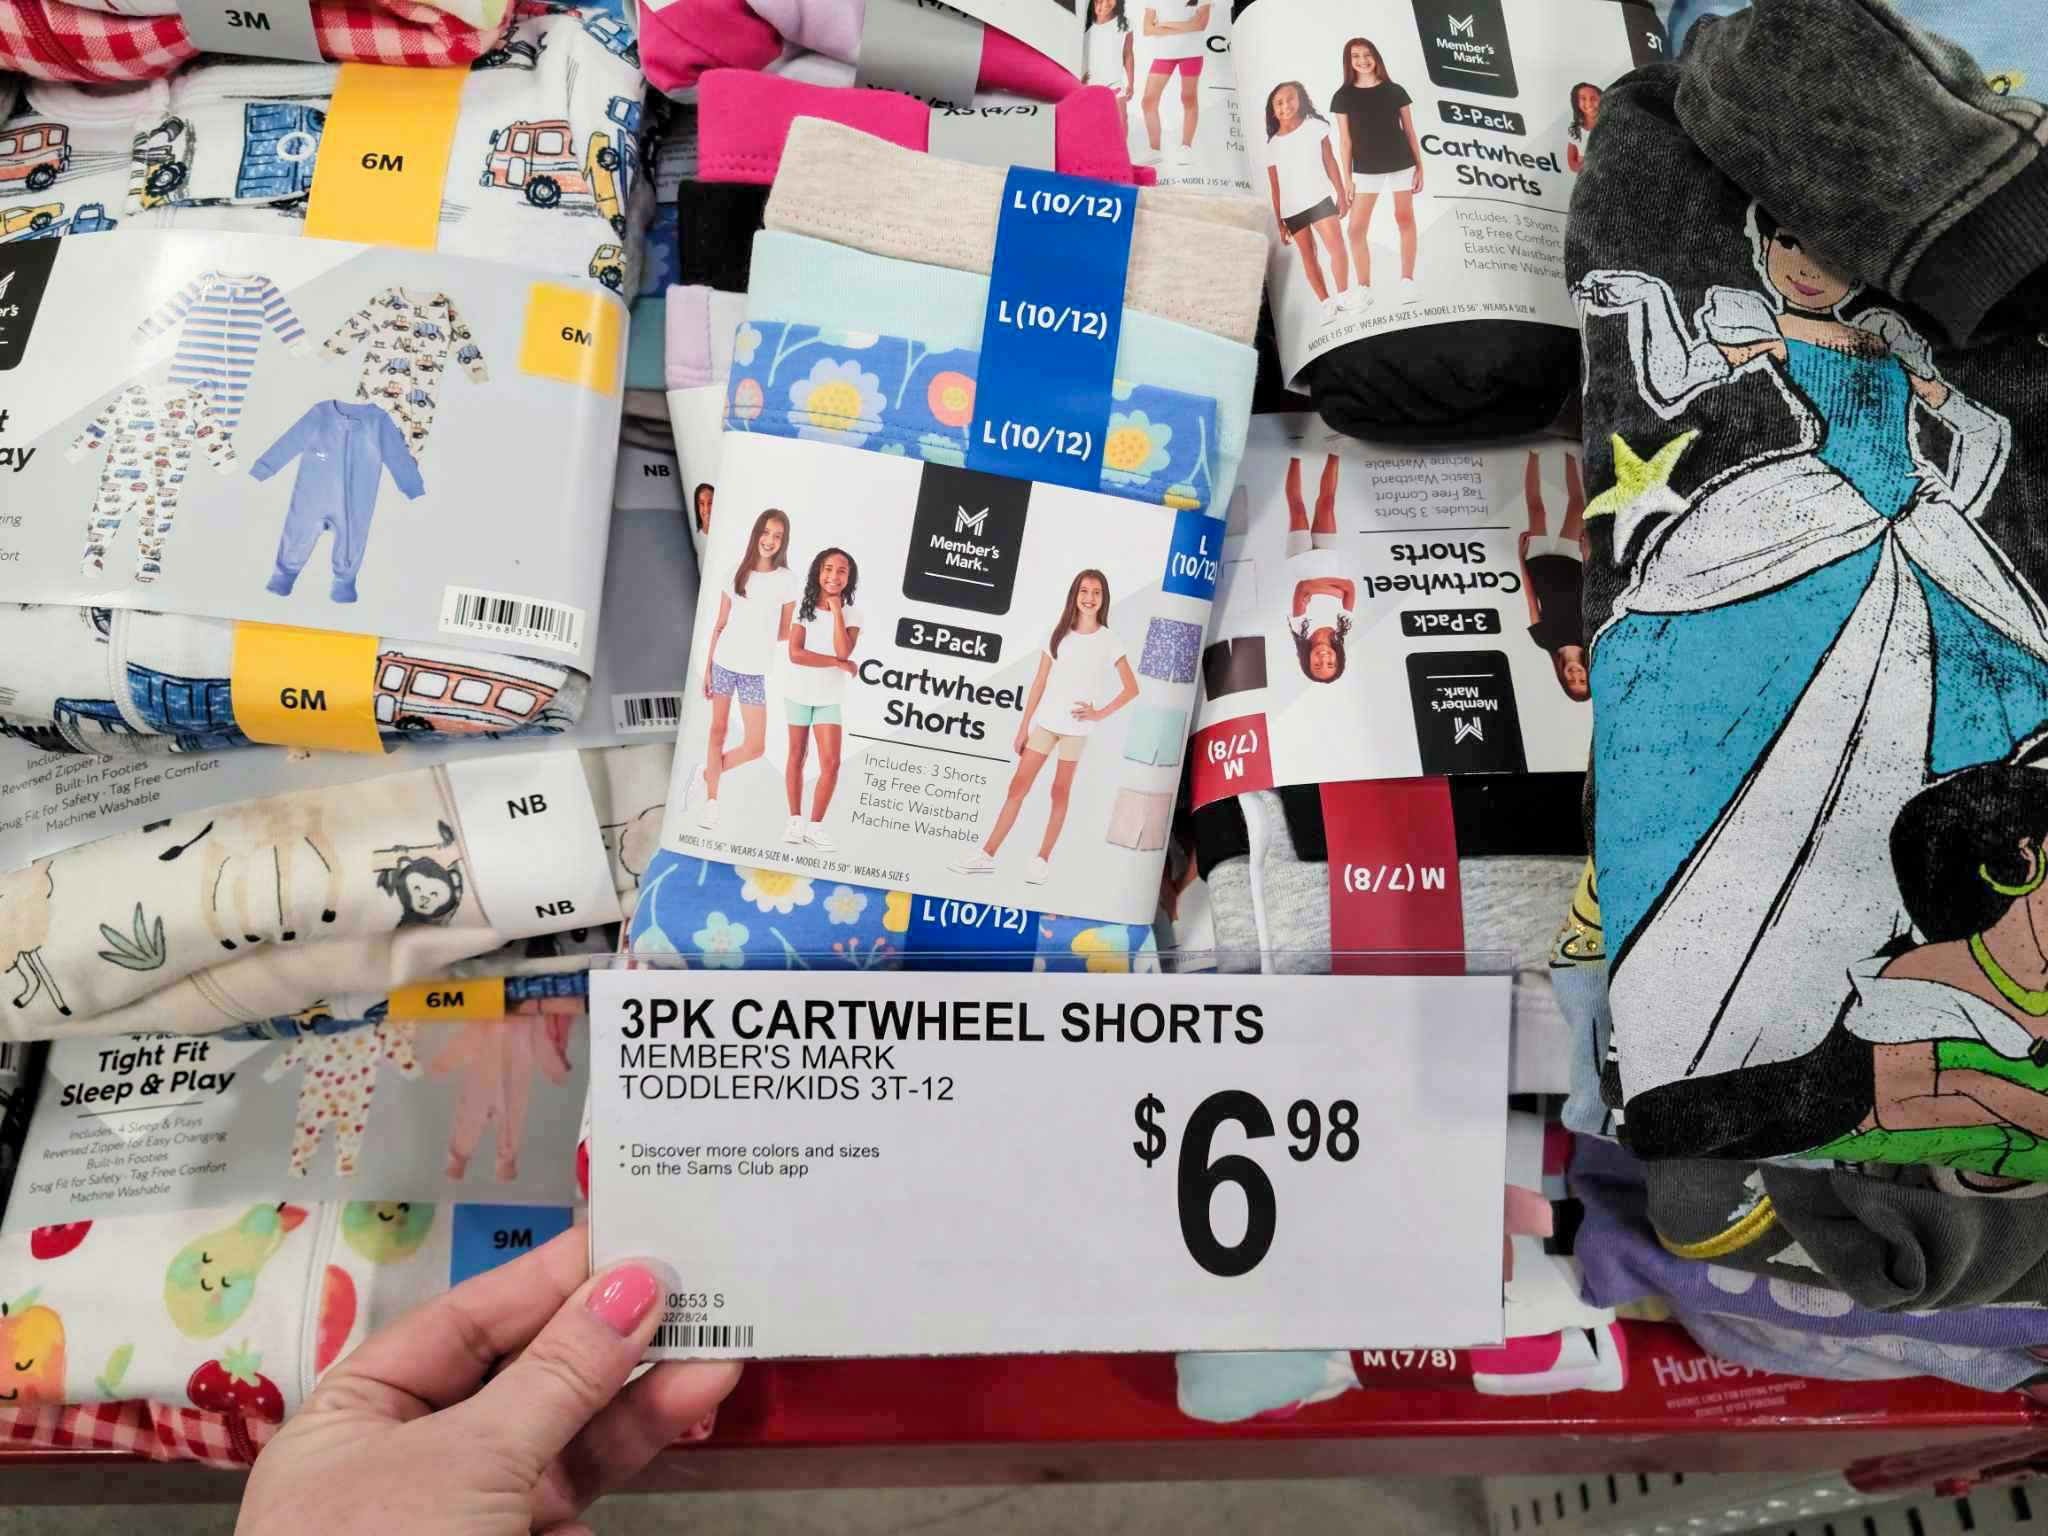 person holding a price sign for $6.98 3-packs of cartwheel shorts in front of a shelf of shorts